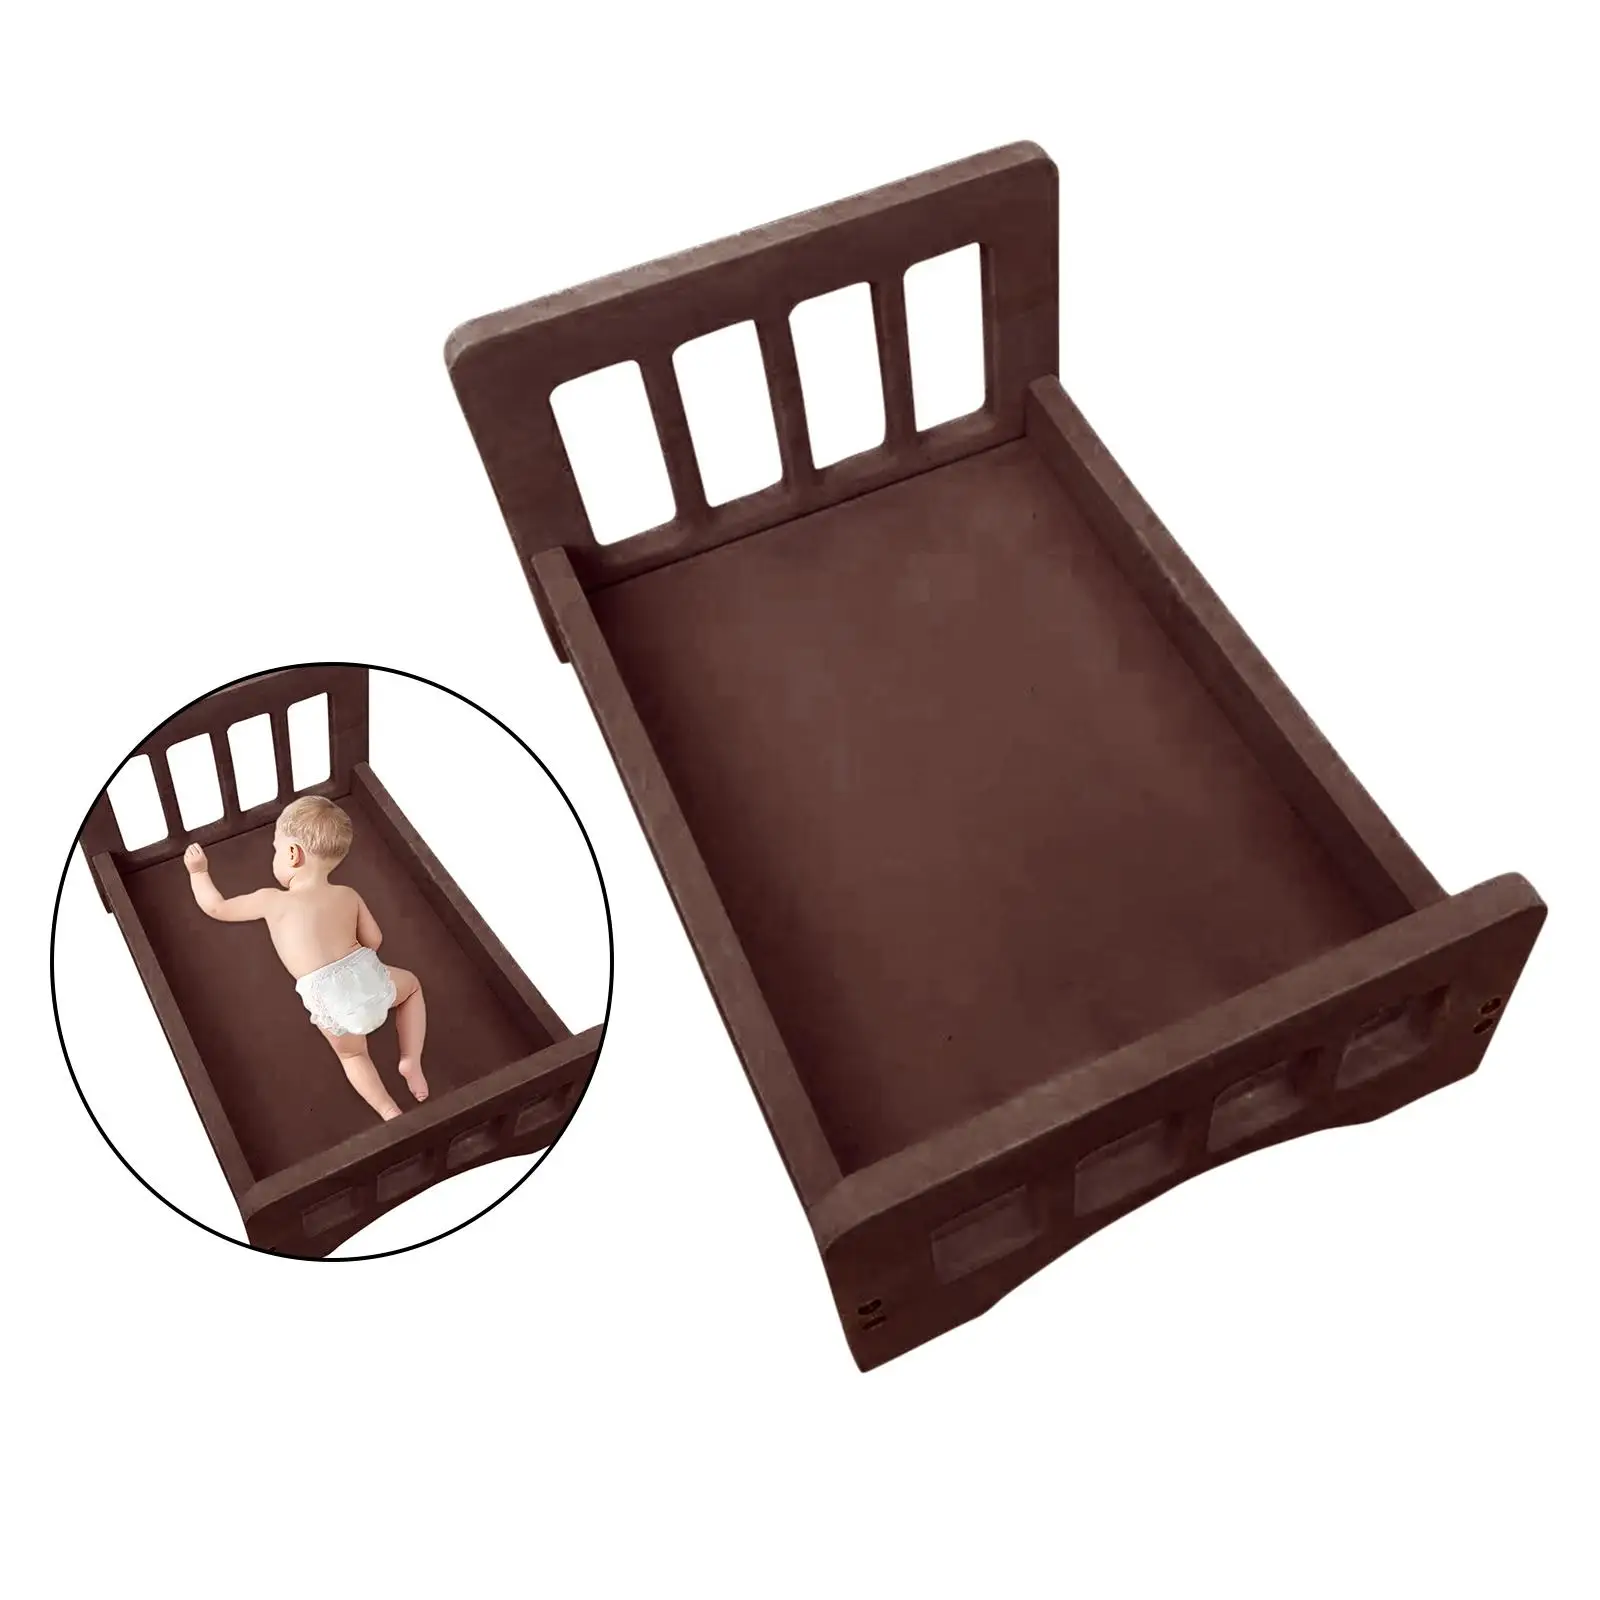 Small wooden bed posing baby photography props, newborn photo background